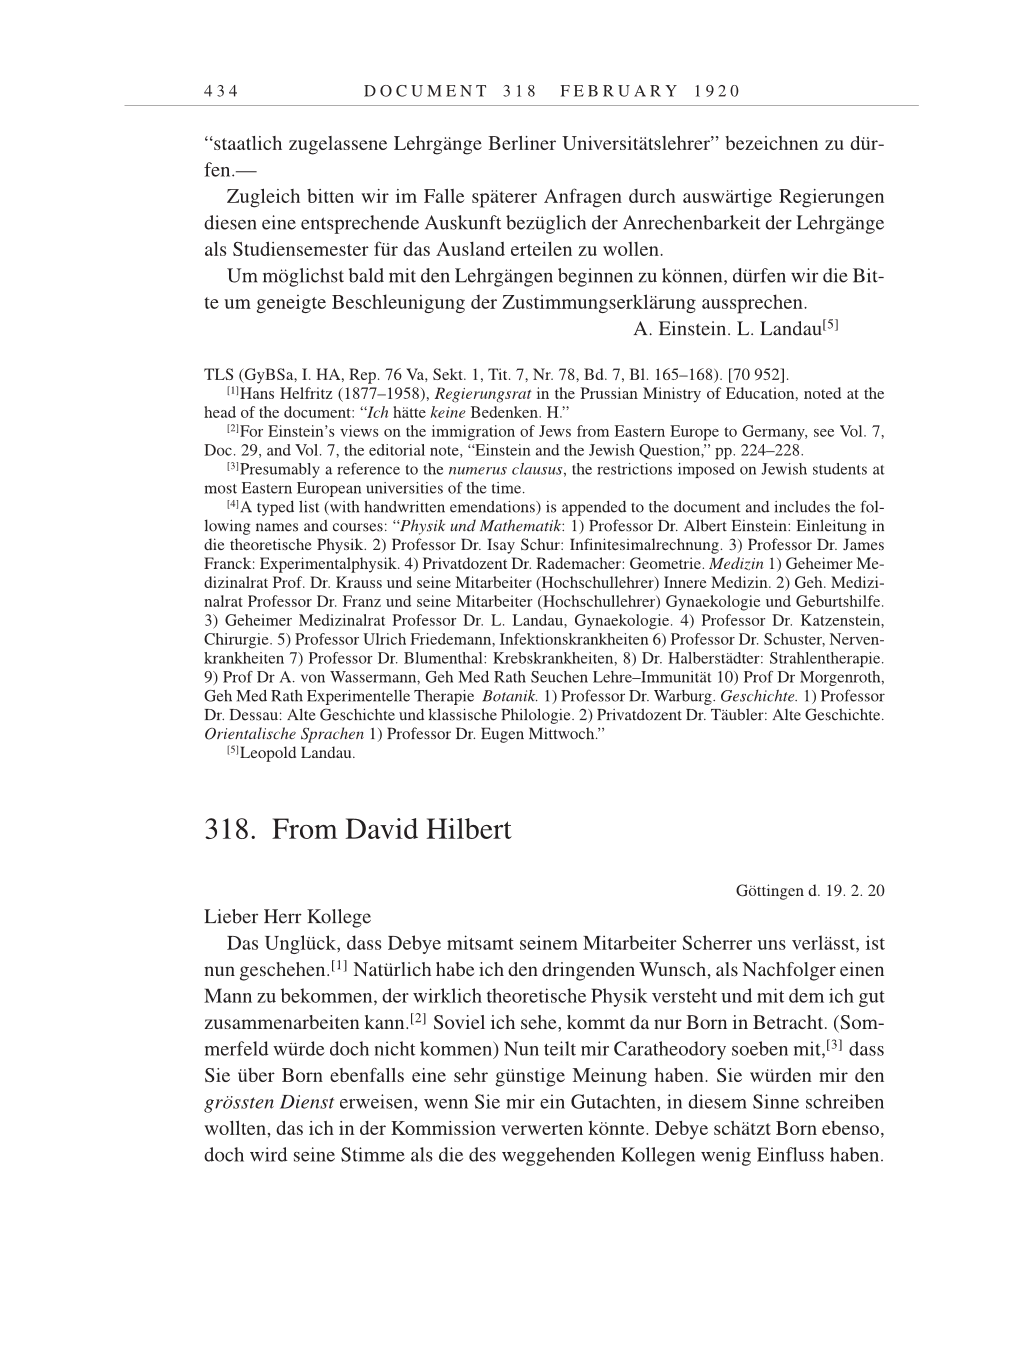 Volume 9: The Berlin Years: Correspondence January 1919-April 1920 page 434